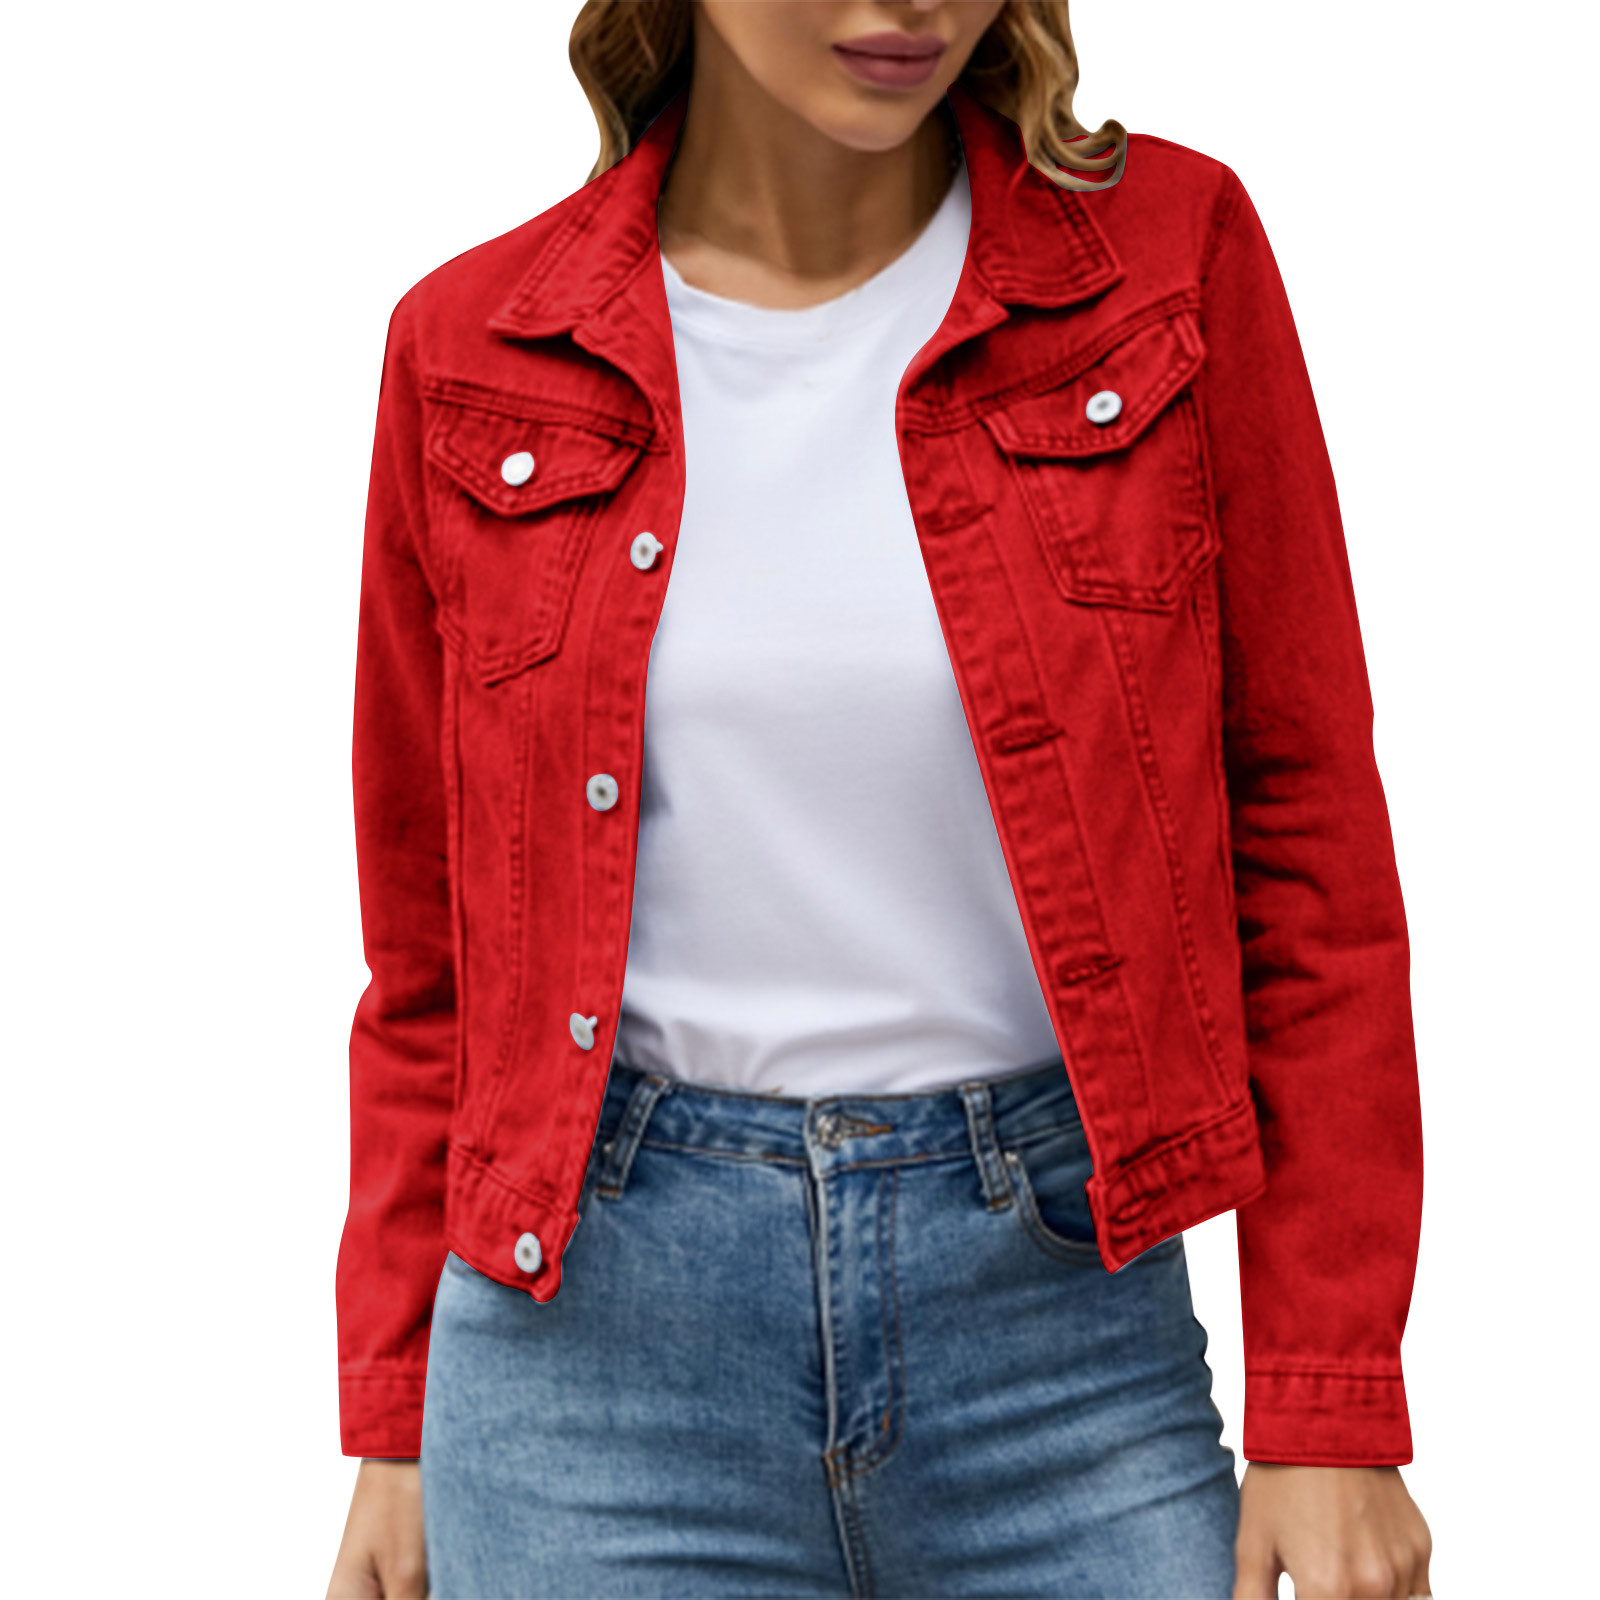 iOPQO womens sweaters Women's Basic Solid Color Button Down Denim Cotton Jacket With Pockets Denim Jacket Coat Women's Denim Jackets Red L - image 1 of 8